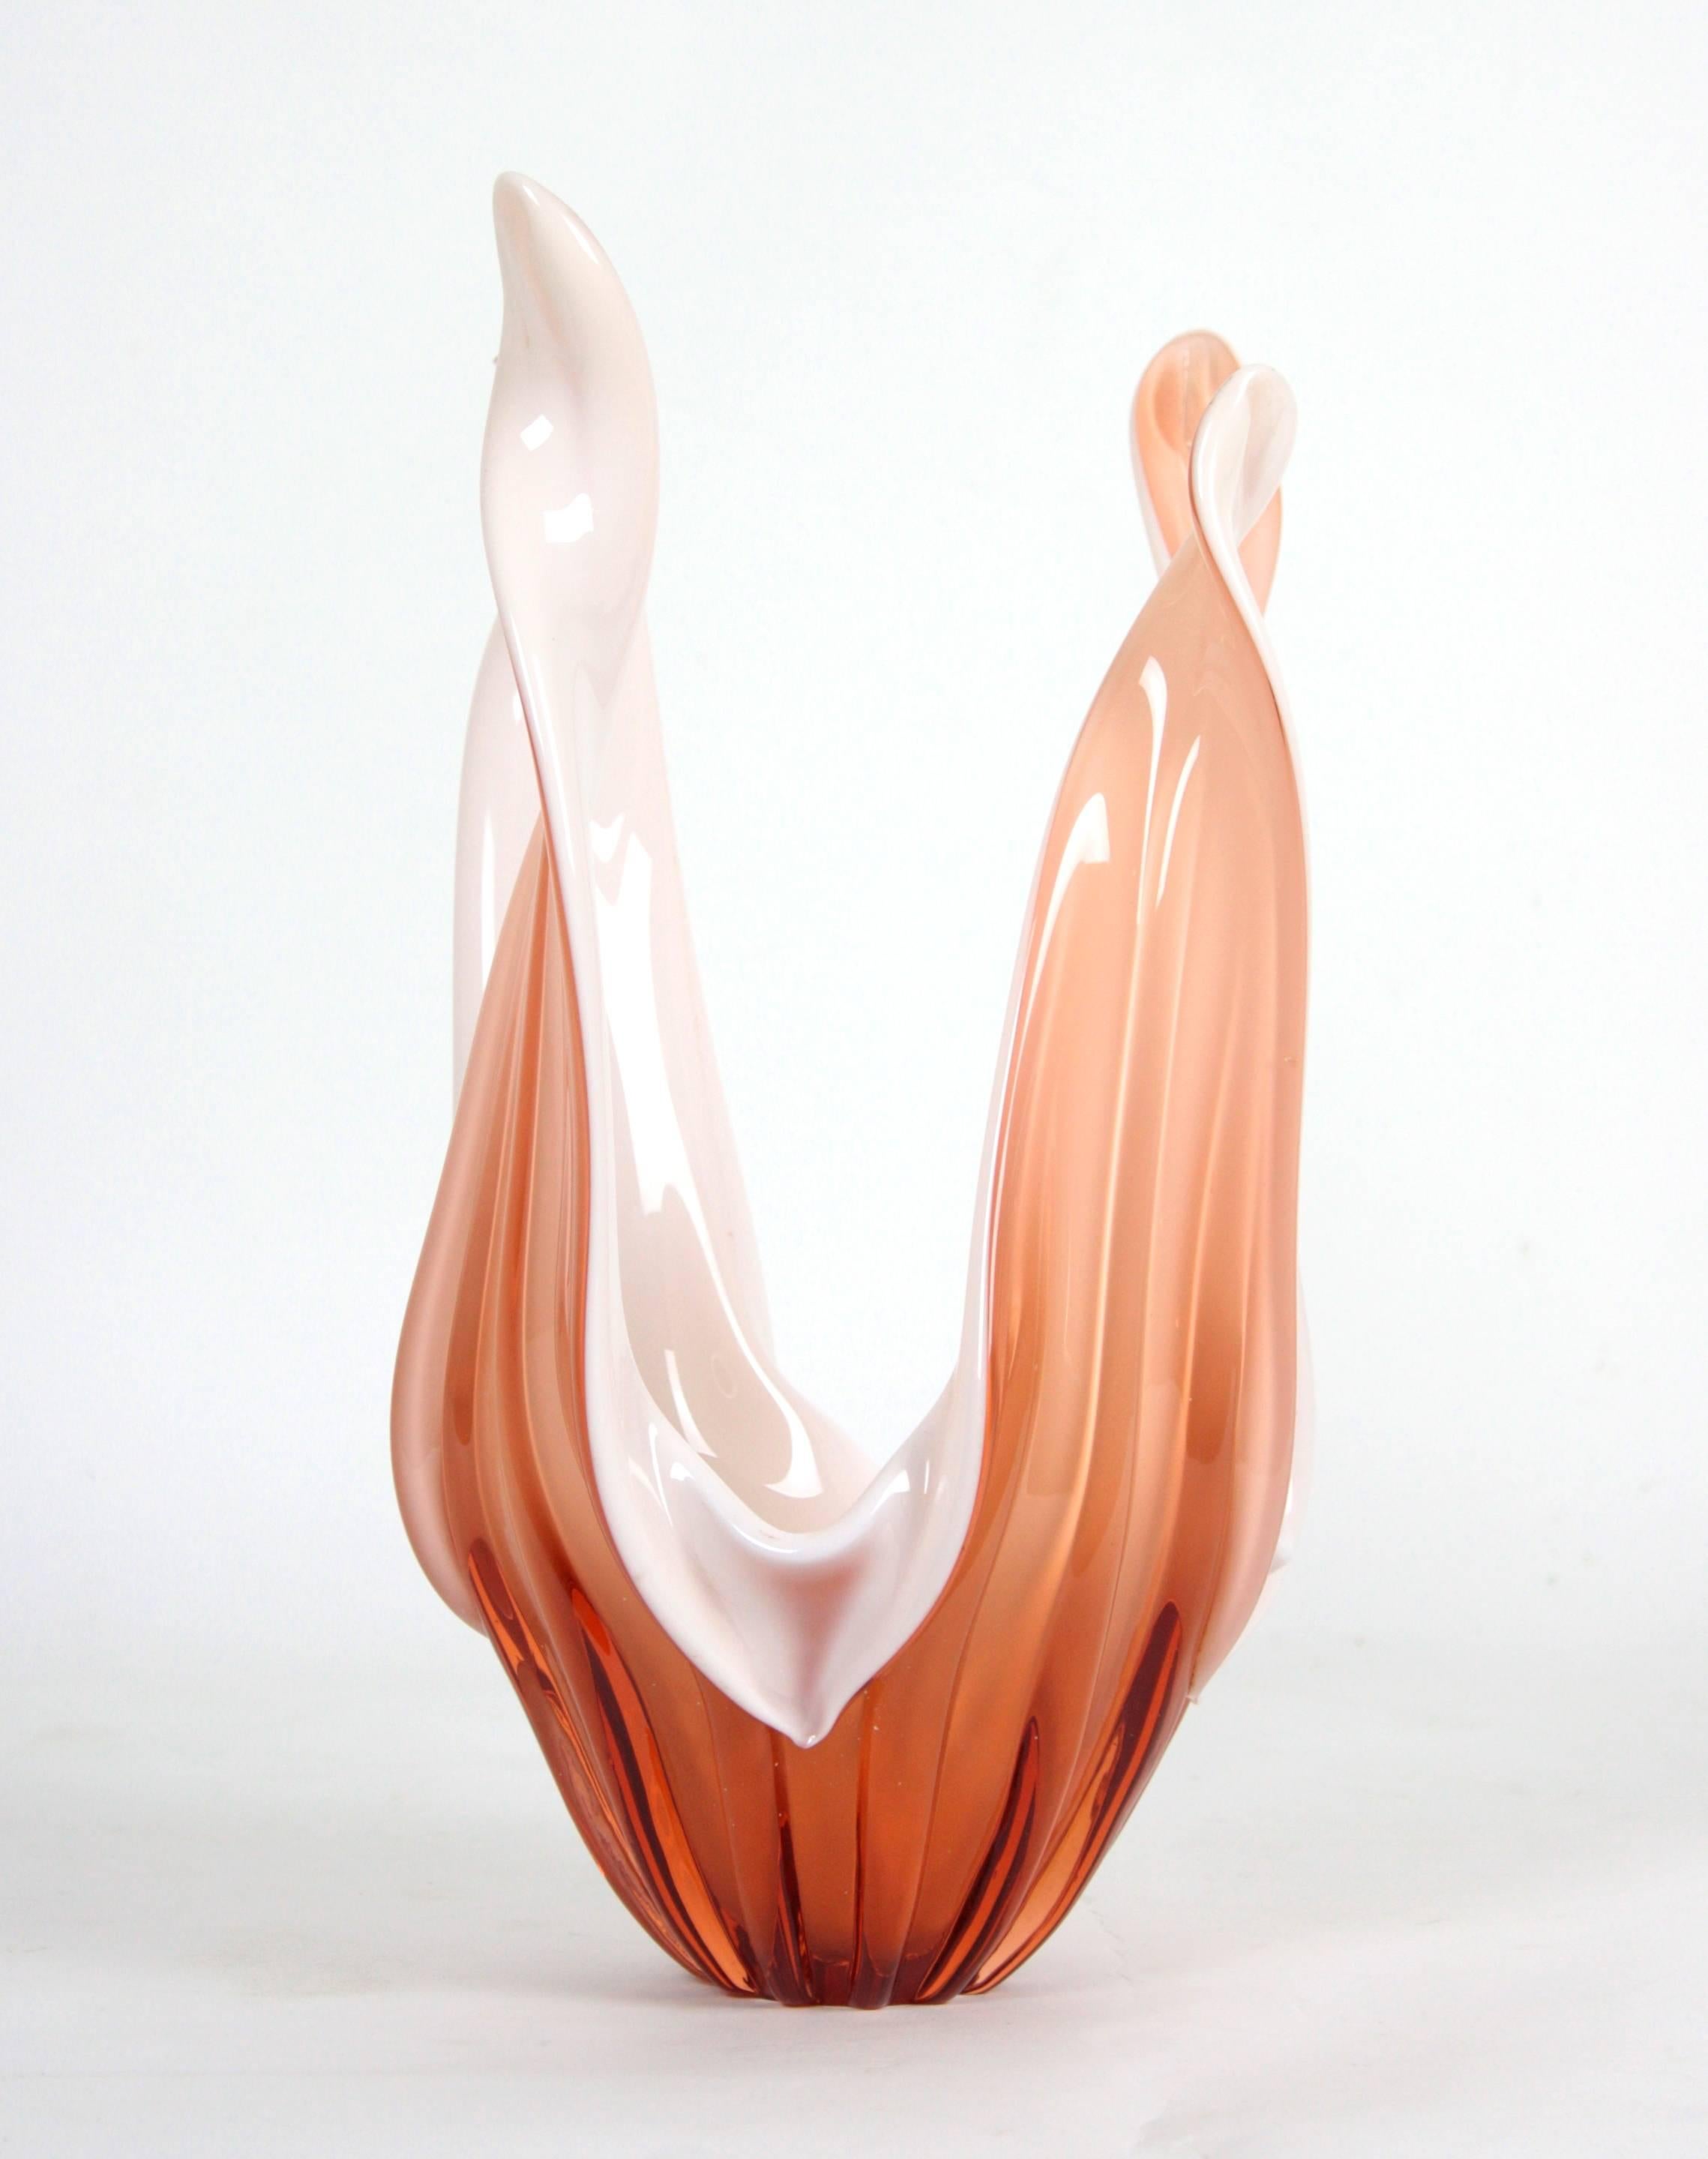 Italian Murano Centerpiece Vase in Peach and Opal White Glass, 1960s For Sale